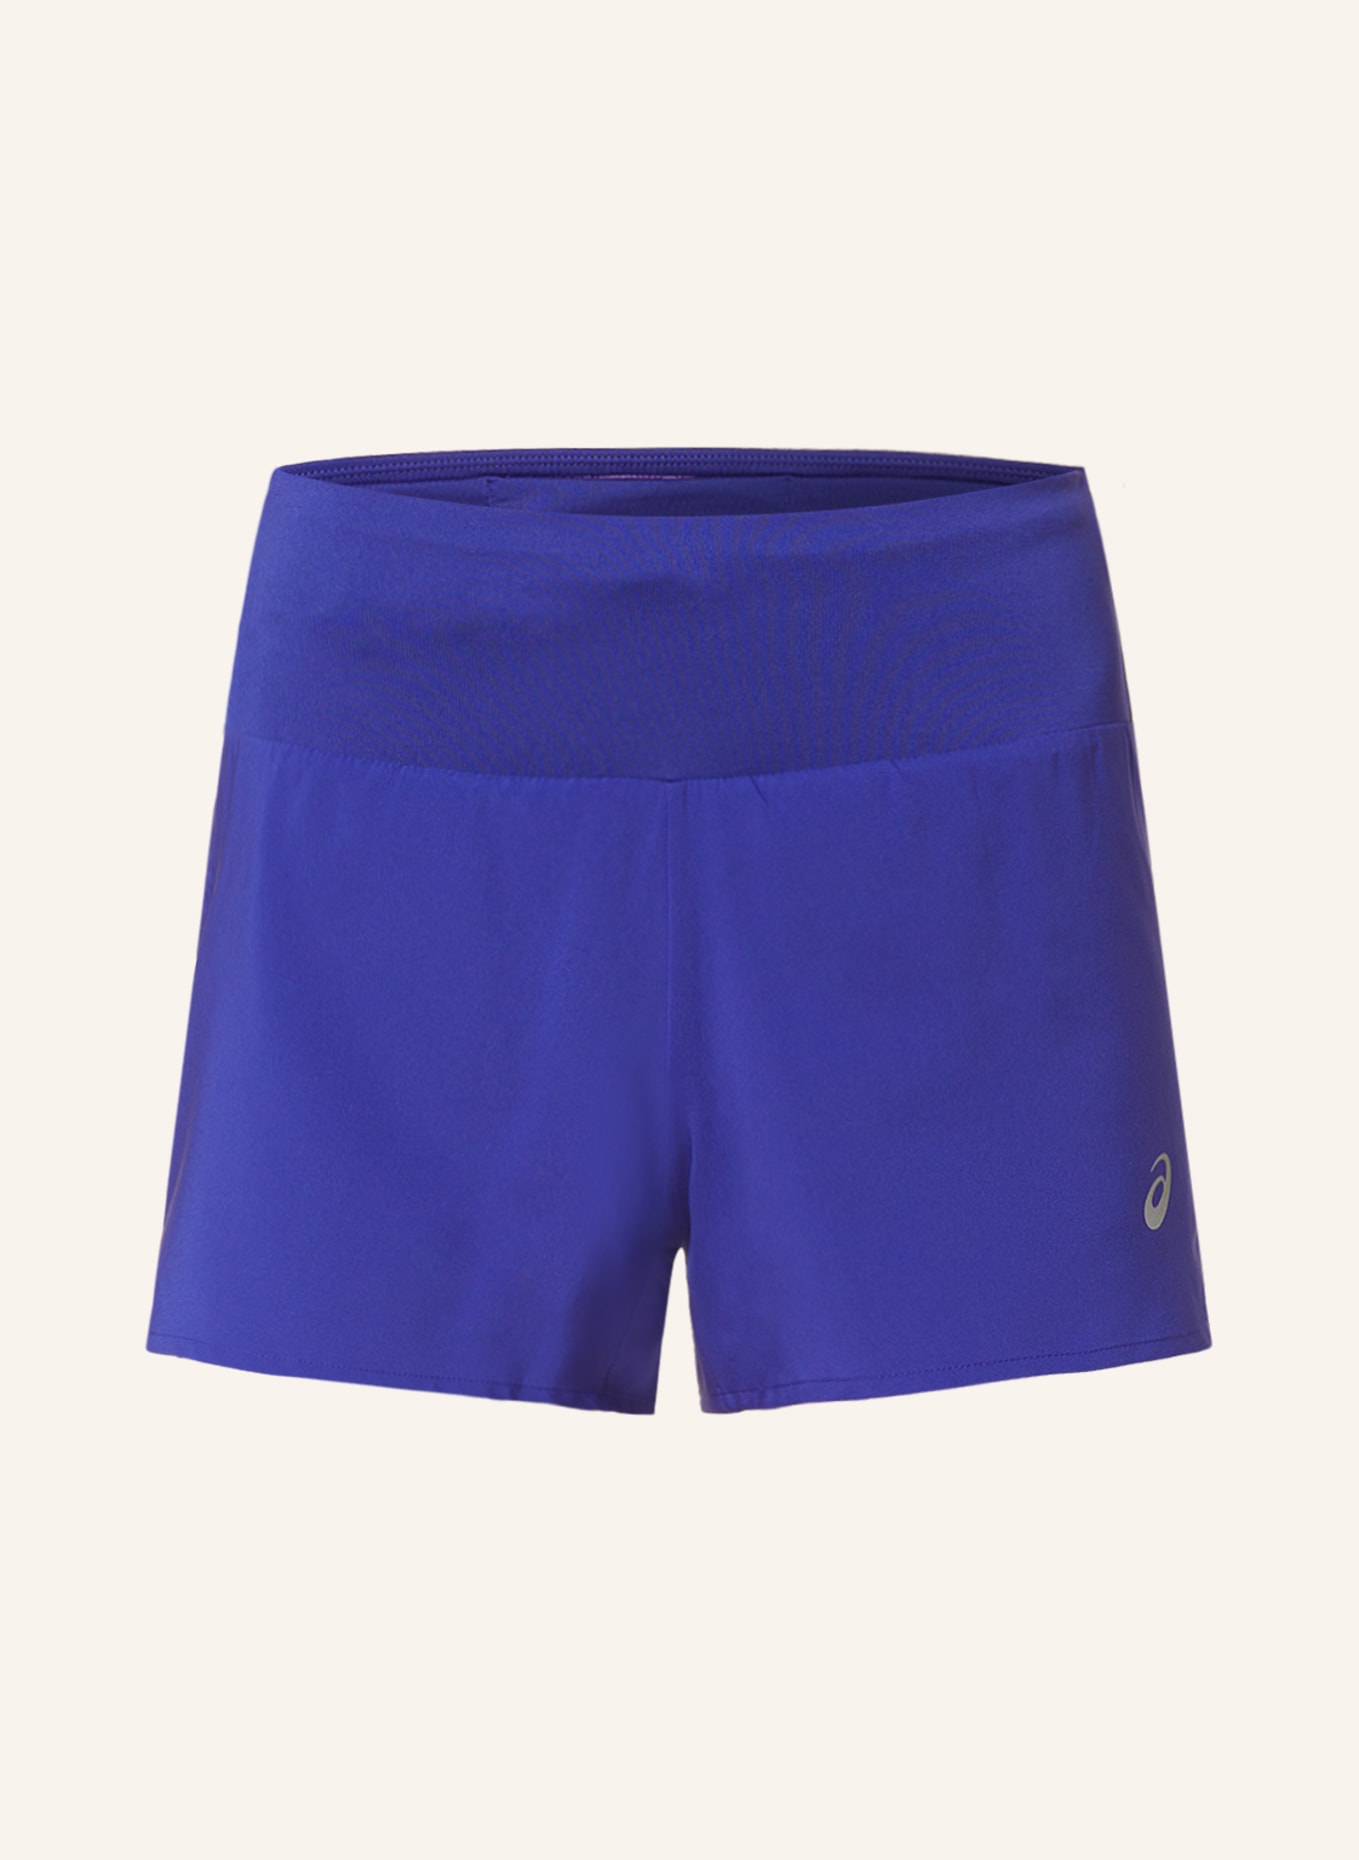 ASICS 2-in-1 running shorts ROAD, Color: PURPLE (Image 1)